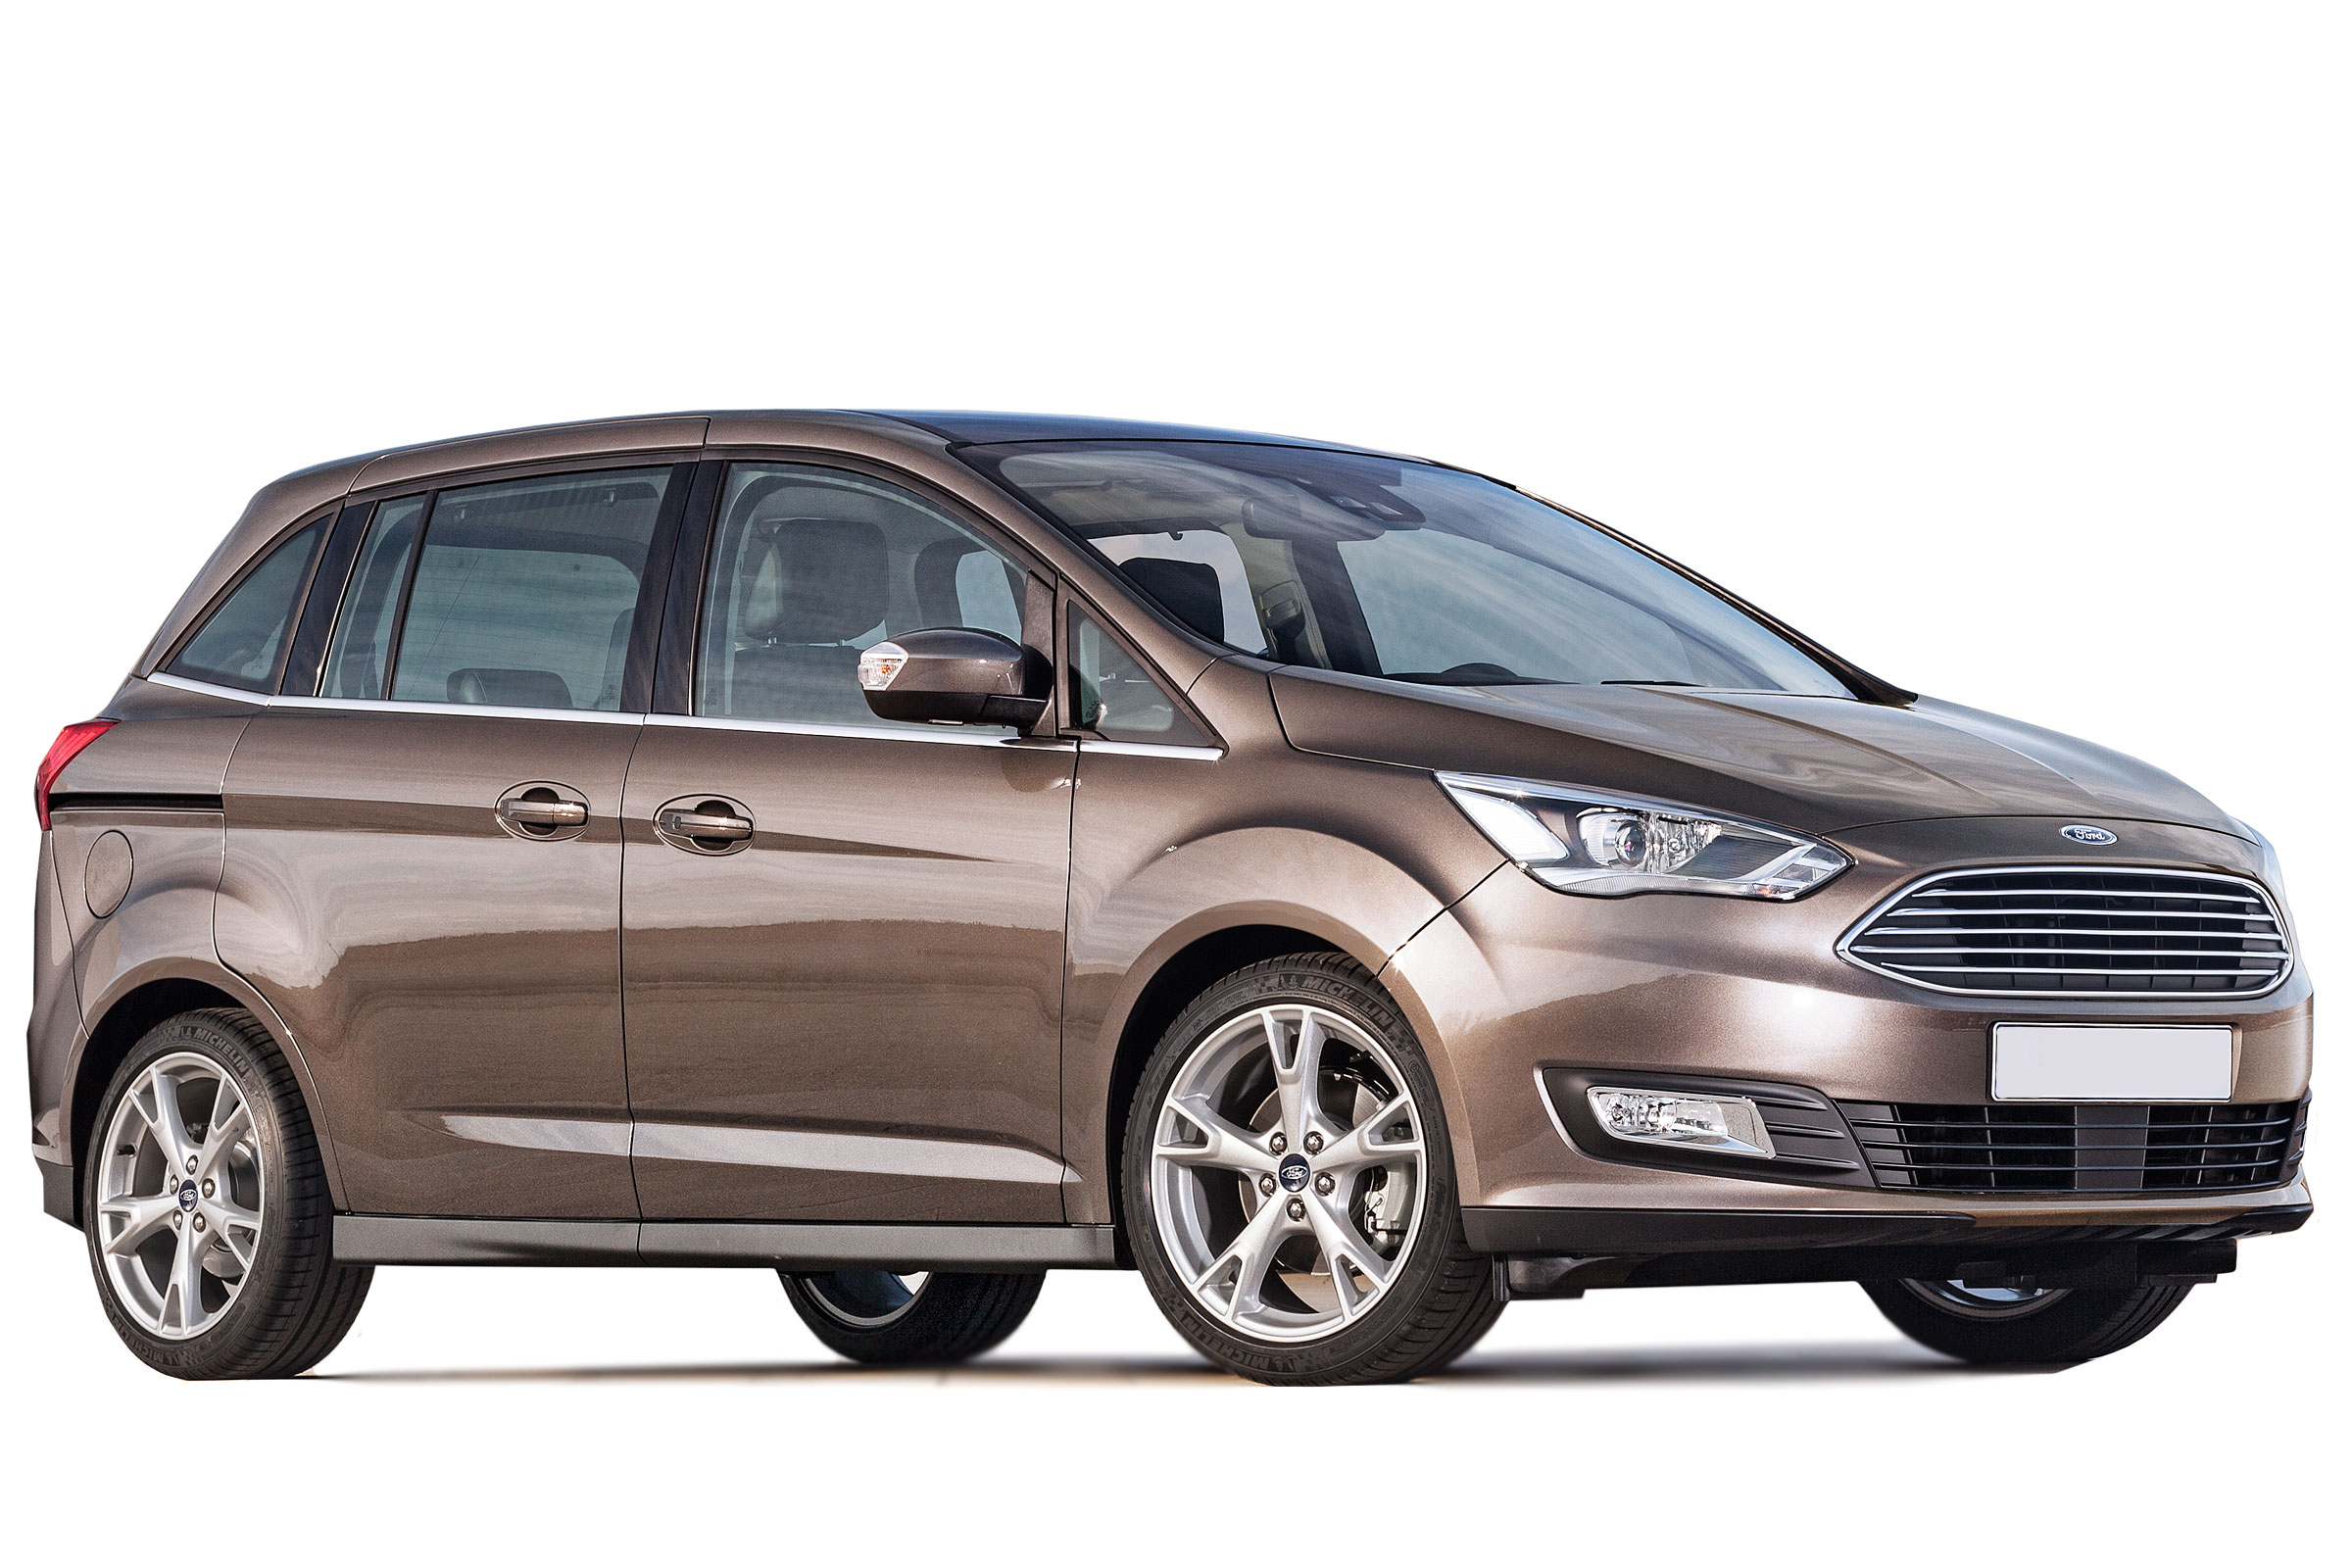 Ford Grand C Max Mpv Owner Reviews Mpg Problems Reliability Carbuyer